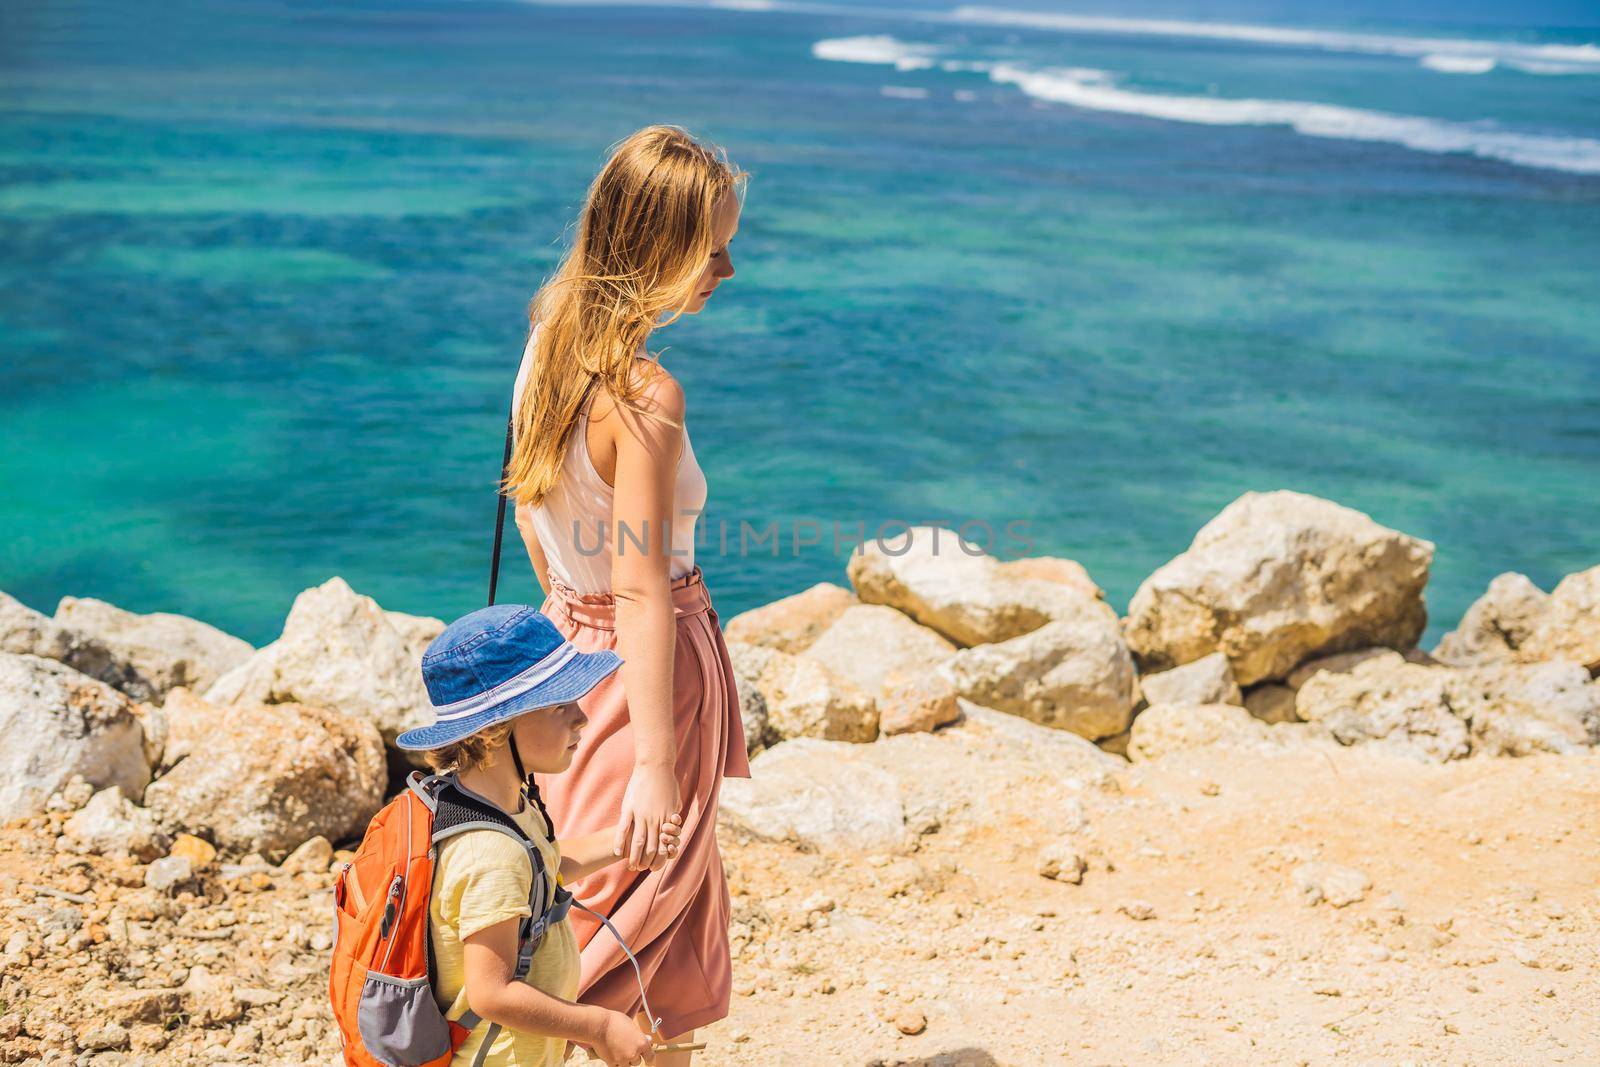 Mom and son travelers on amazing Melasti Beach with turquoise water, Bali Island Indonesia. Traveling with kids concept.